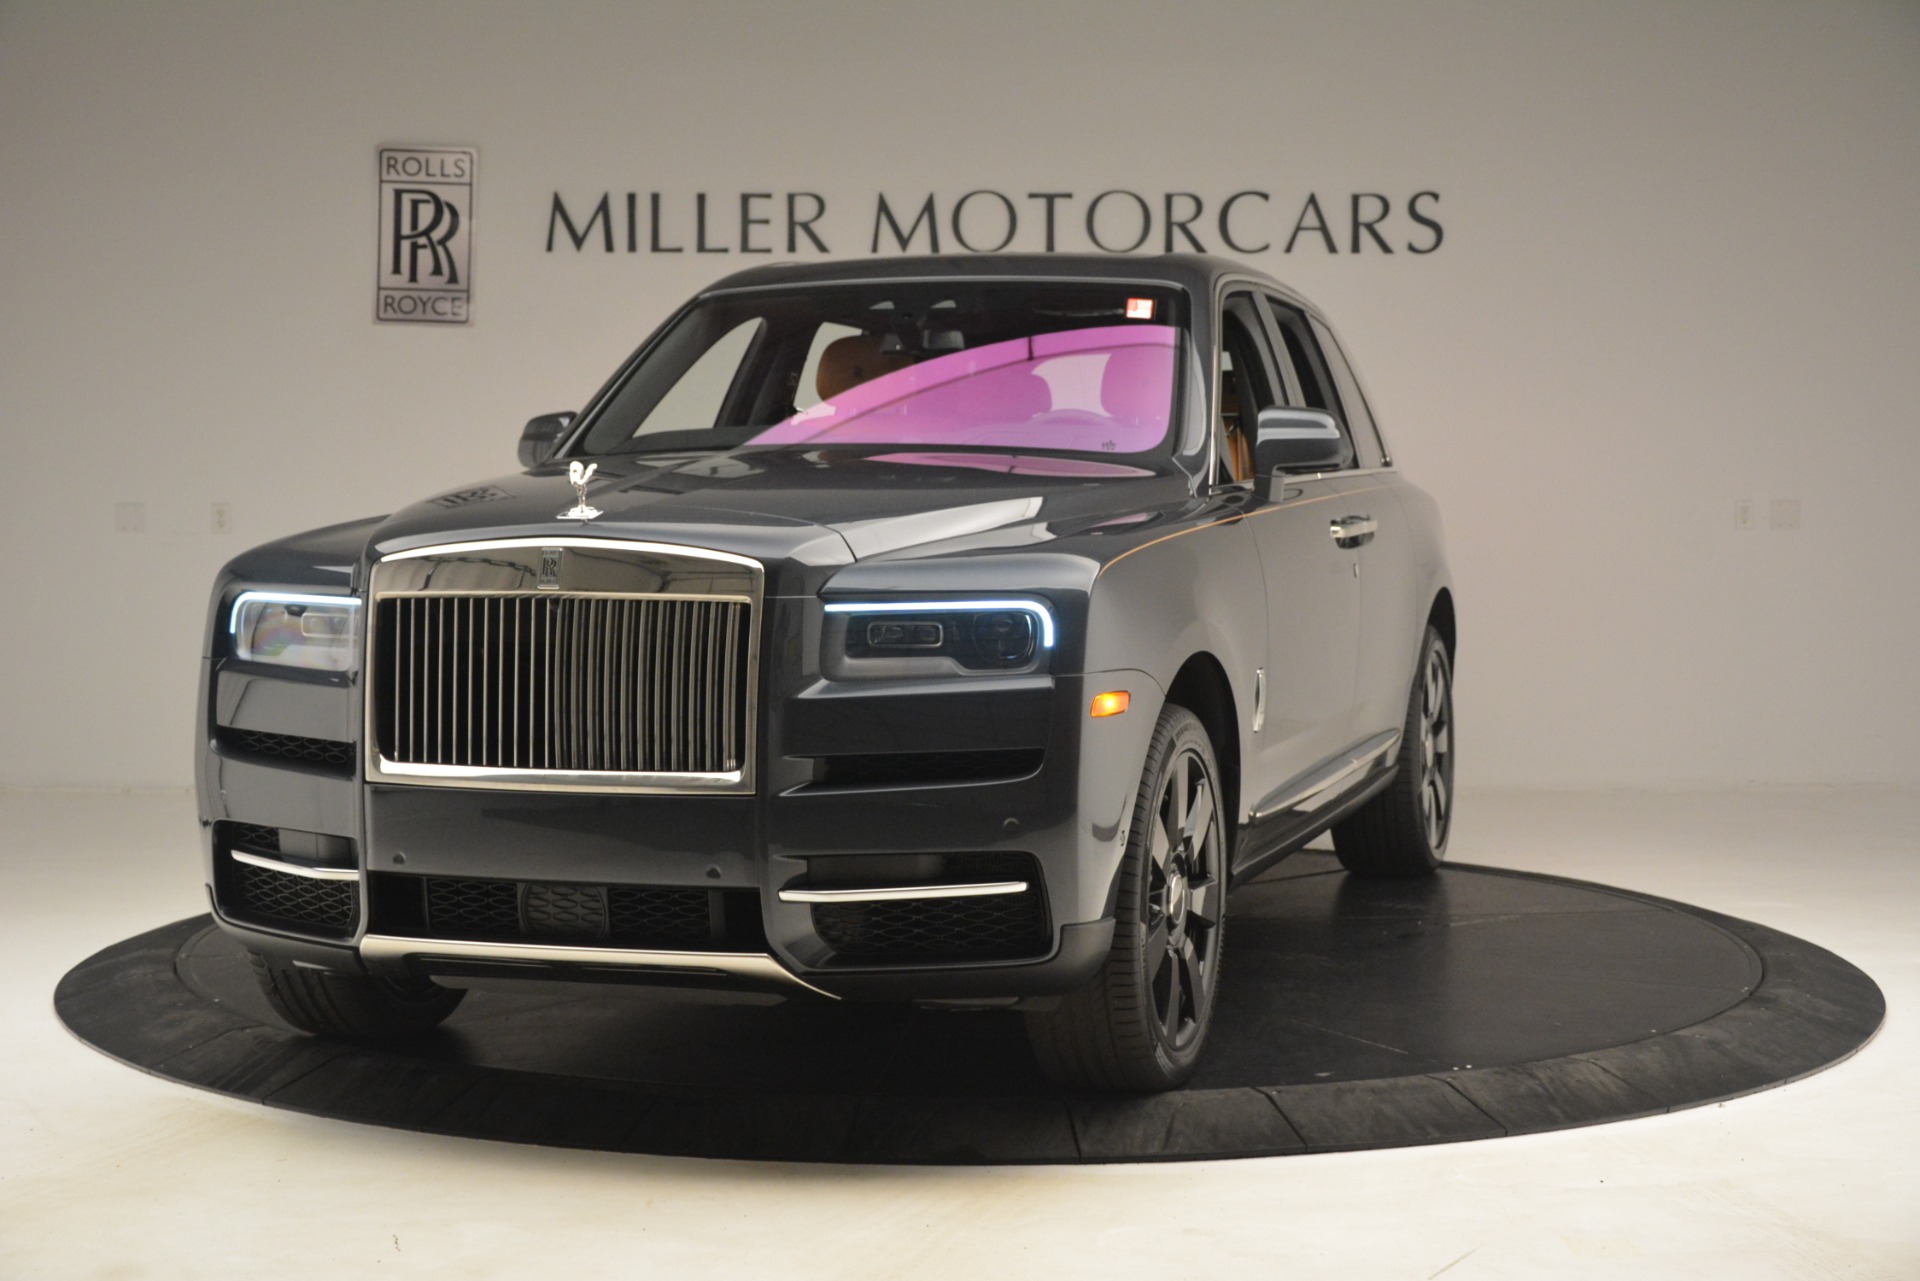 Used 2019 RollsRoyce Cullinan for Sale Right Now  Autotrader